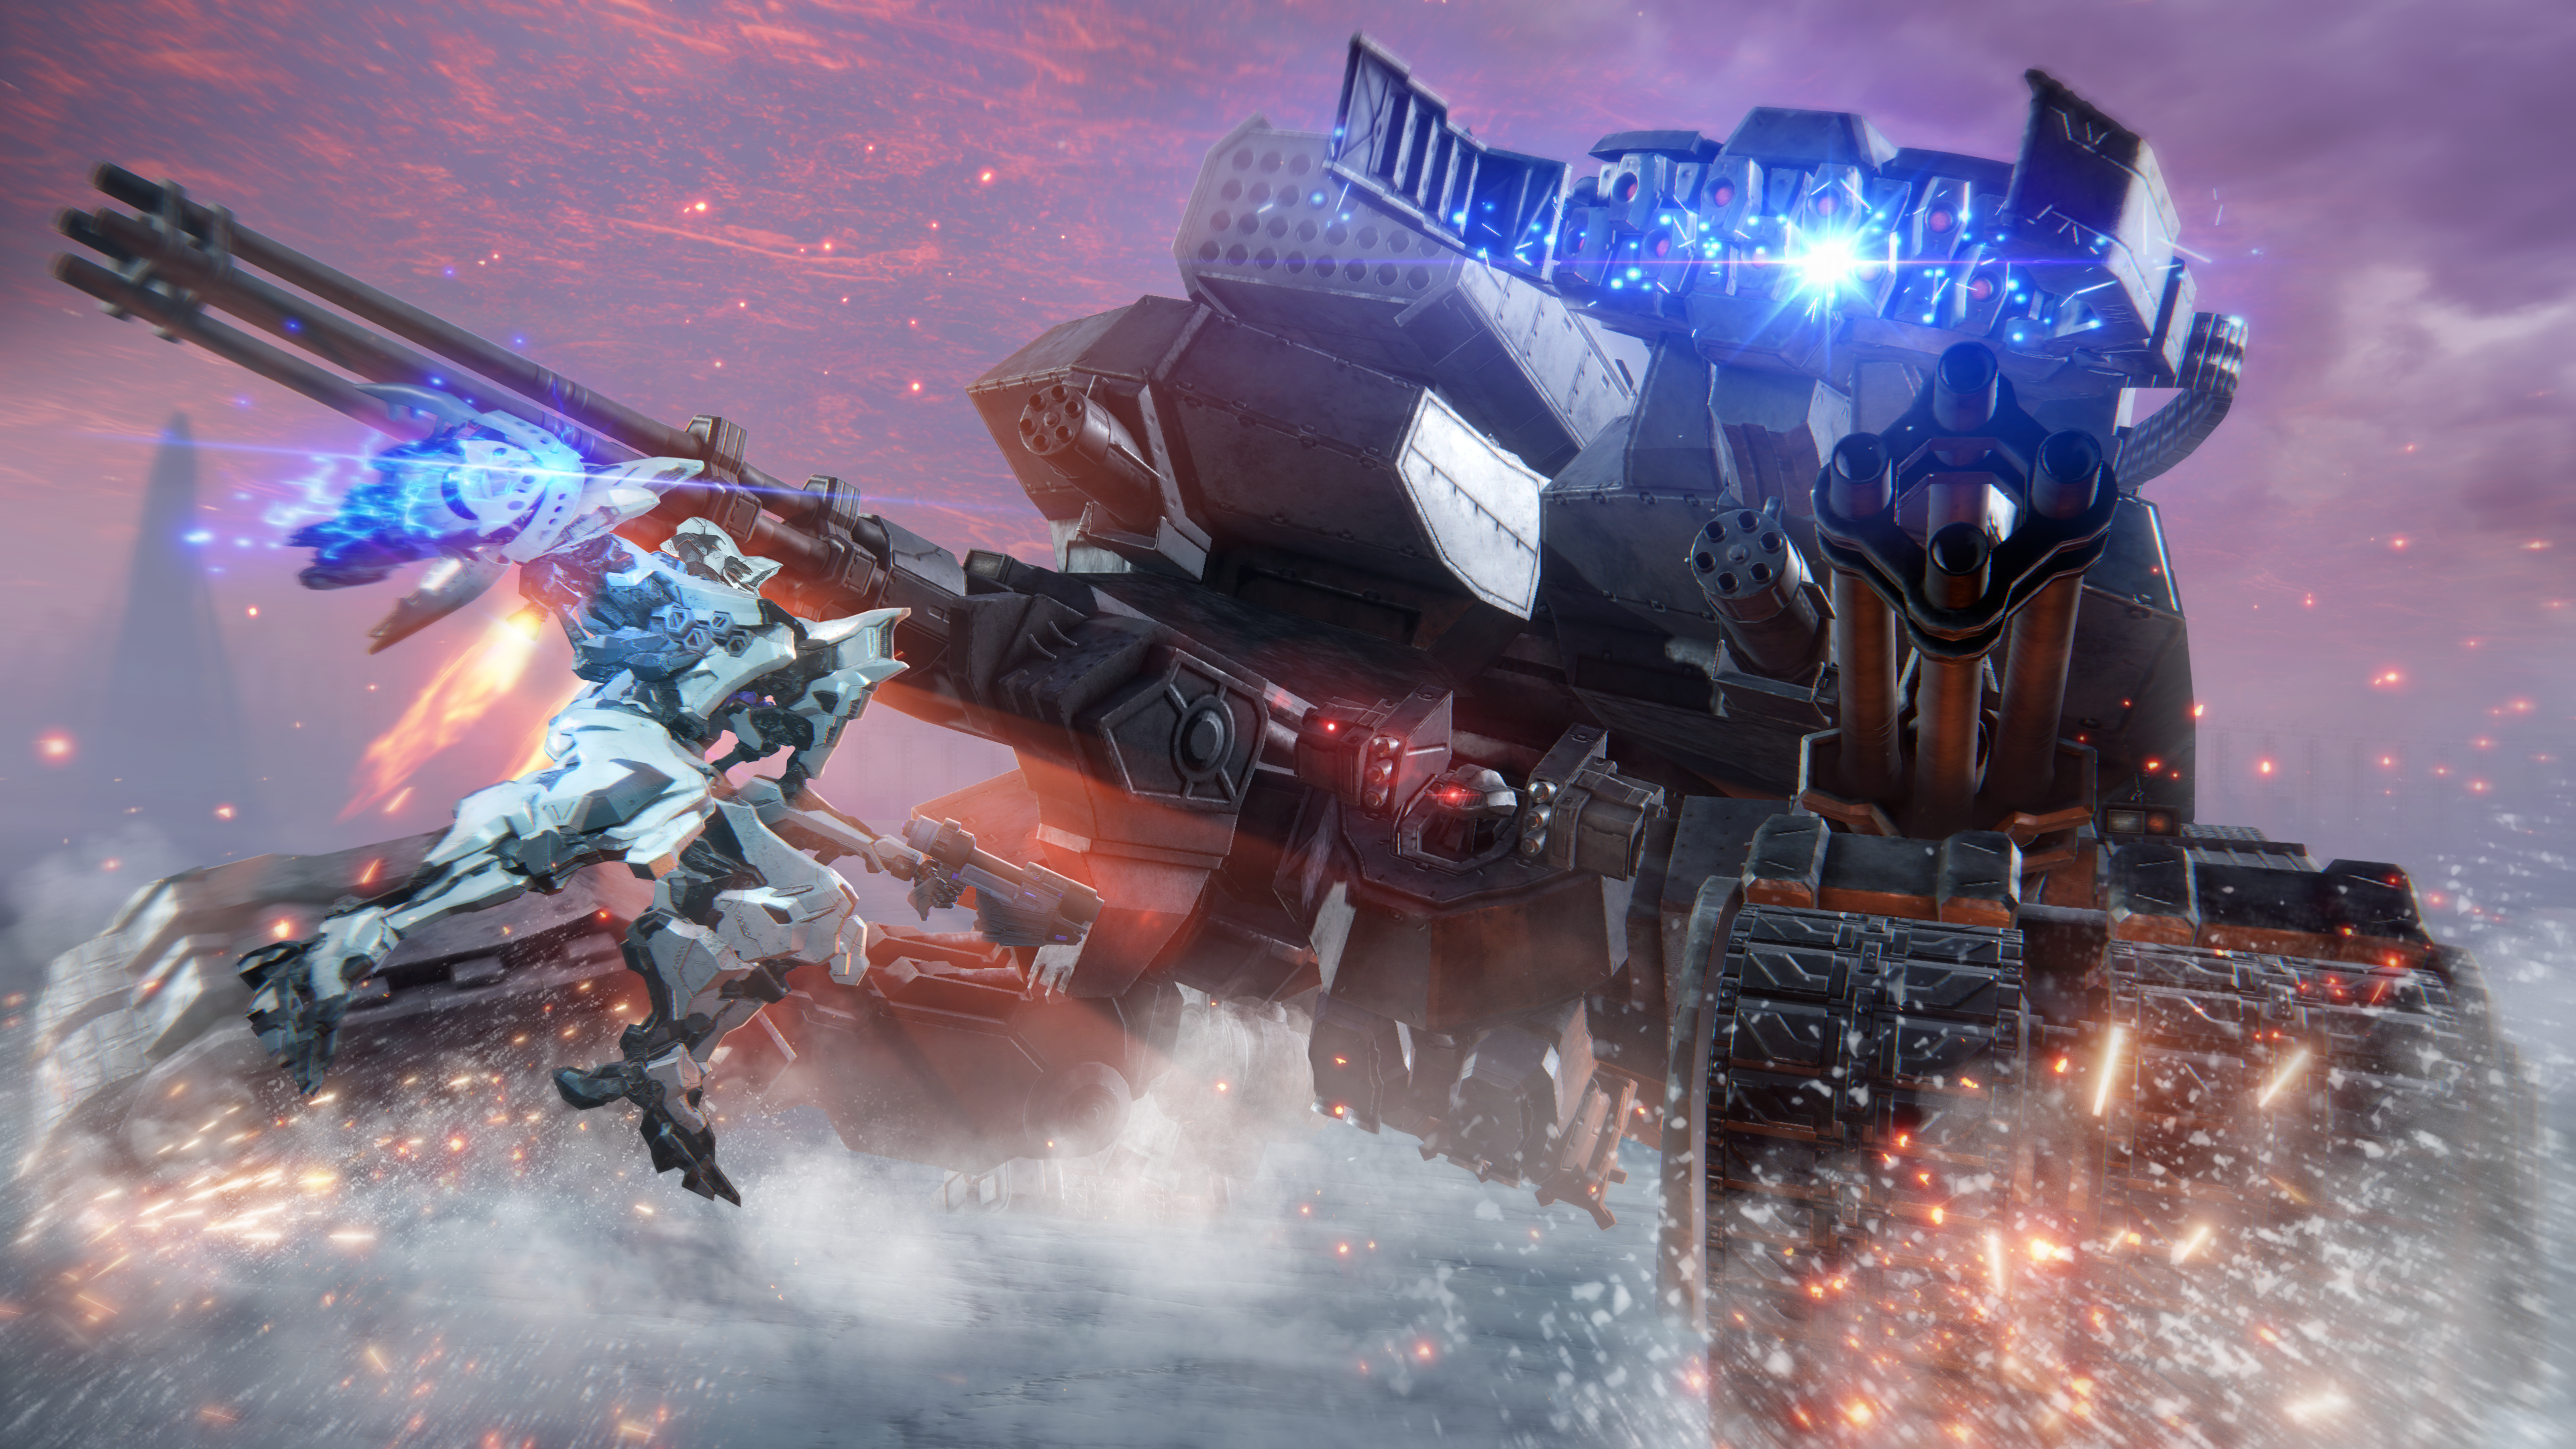 Armored Core 6: Fires of Rubicon review: still an acquired taste